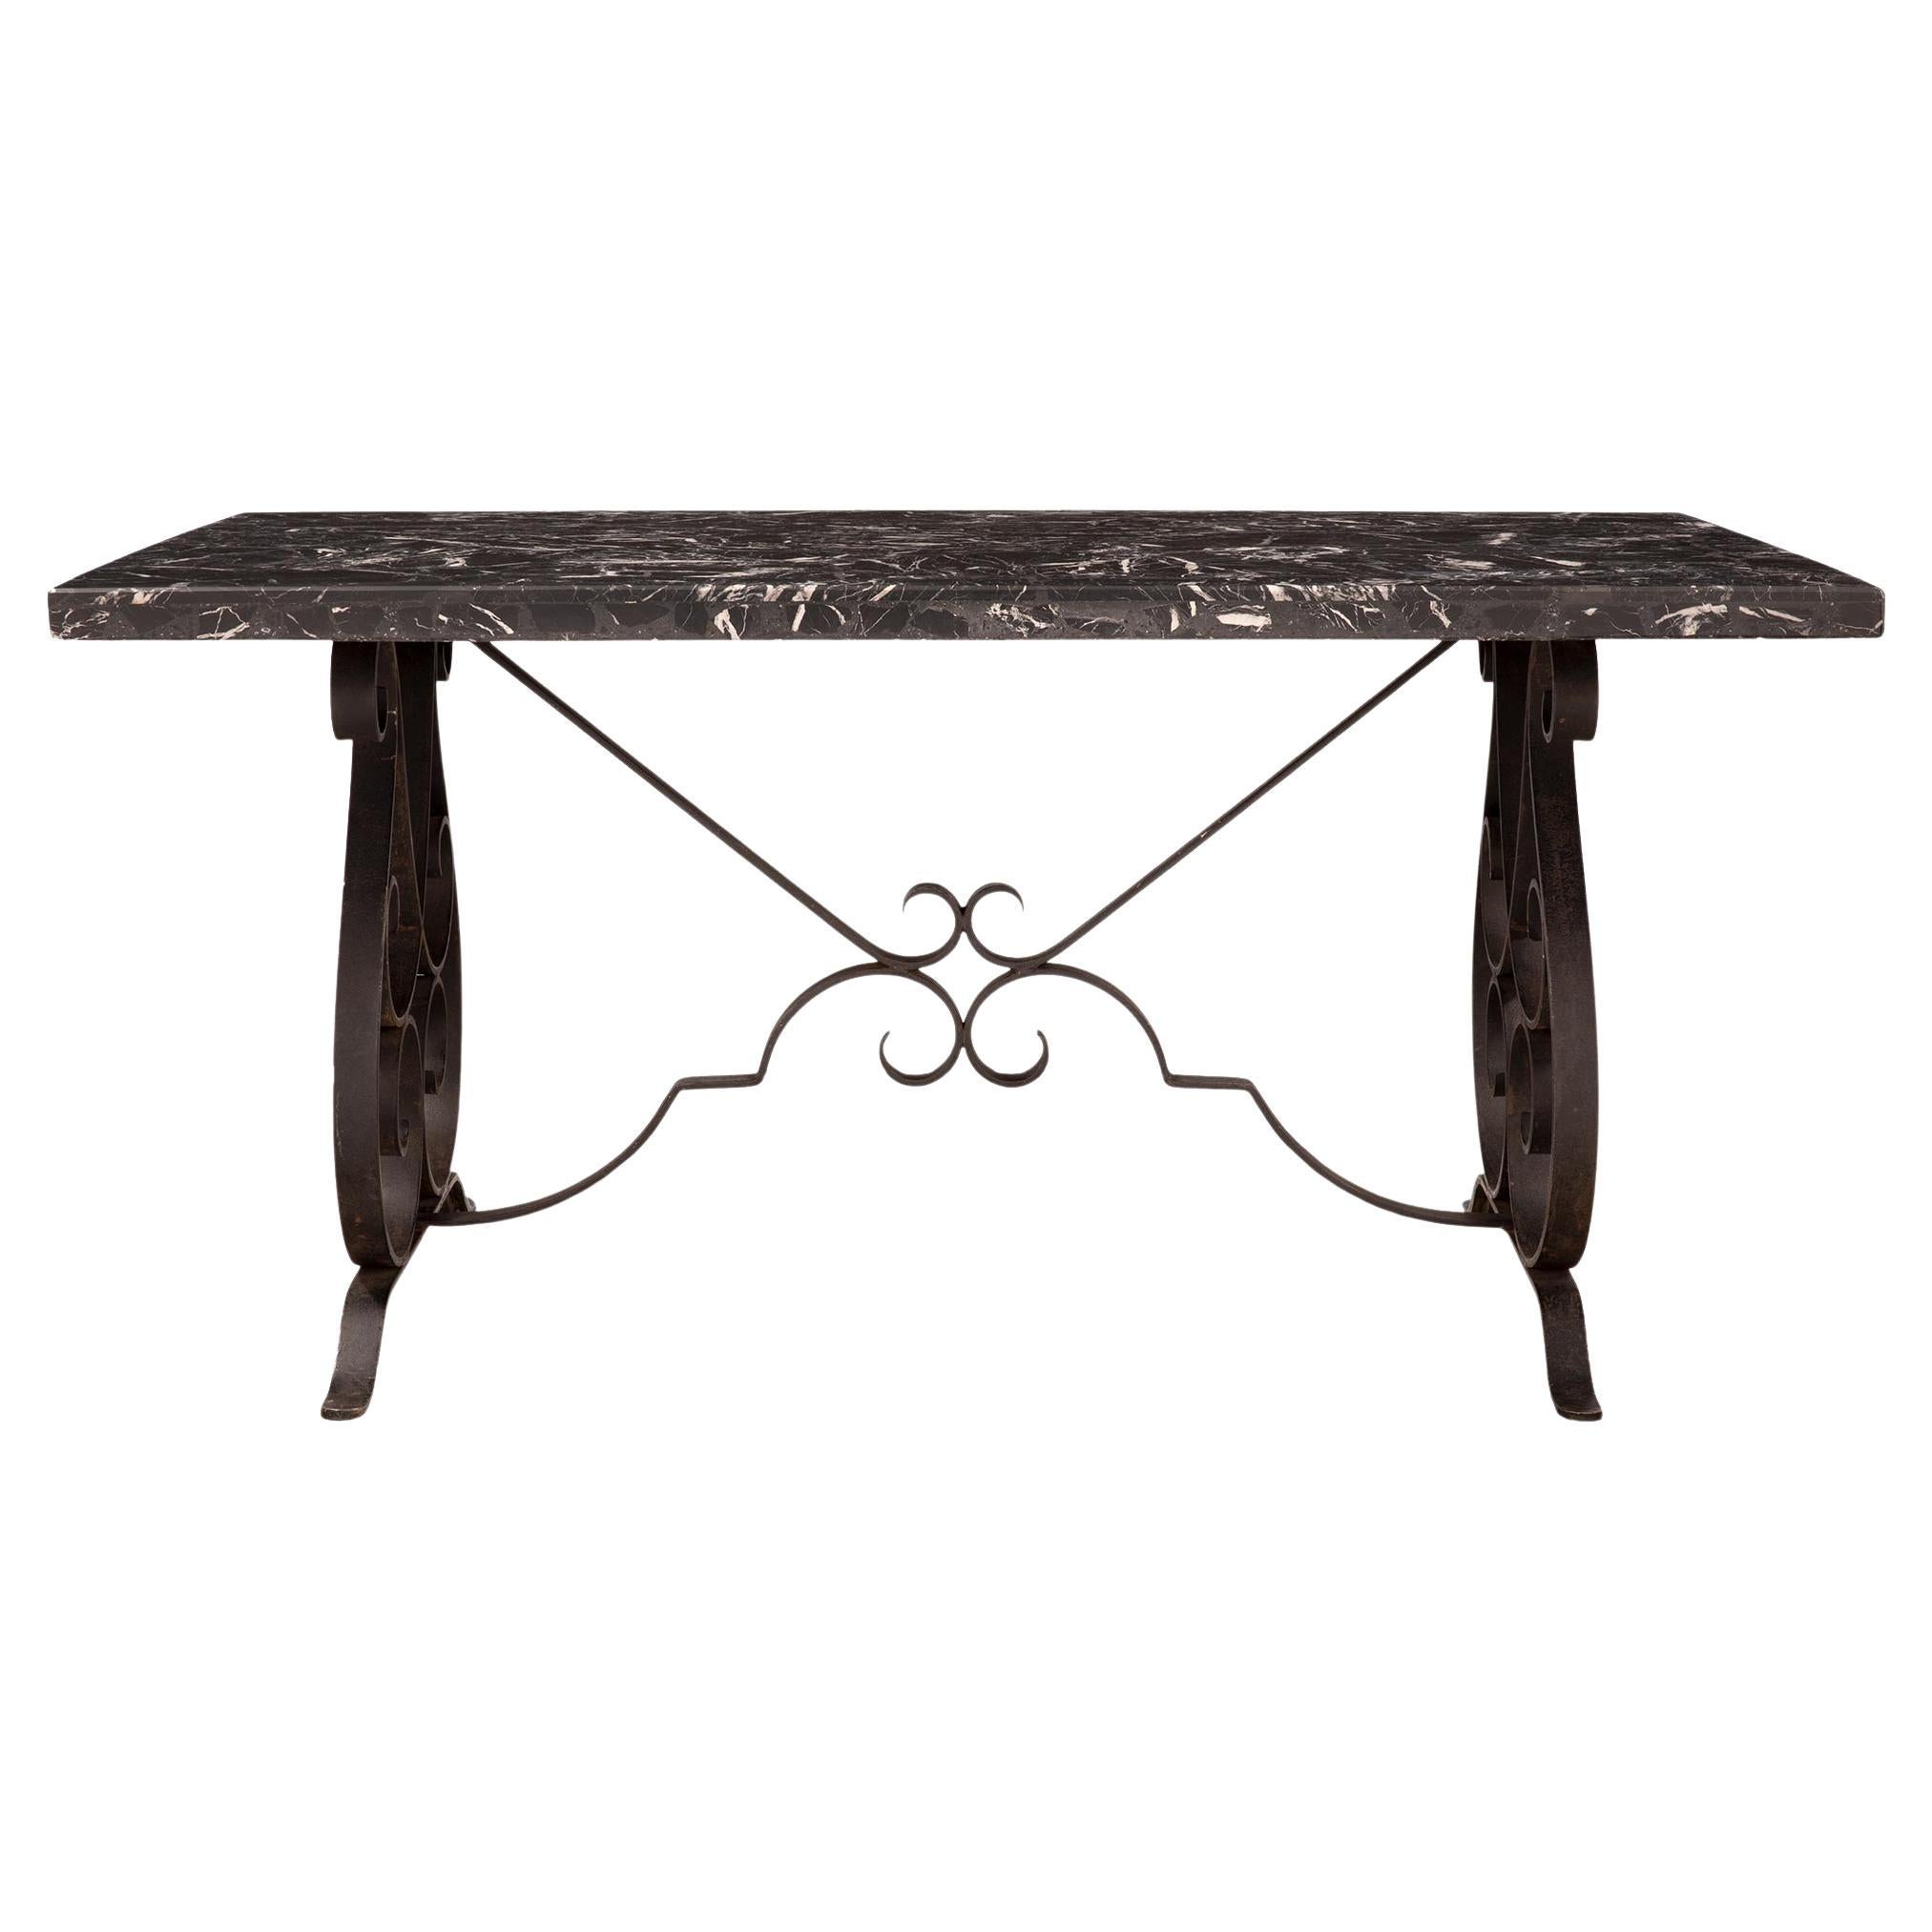 French 19th Century Wrought Iron and Grand Antique Marble Center or Dining Table For Sale